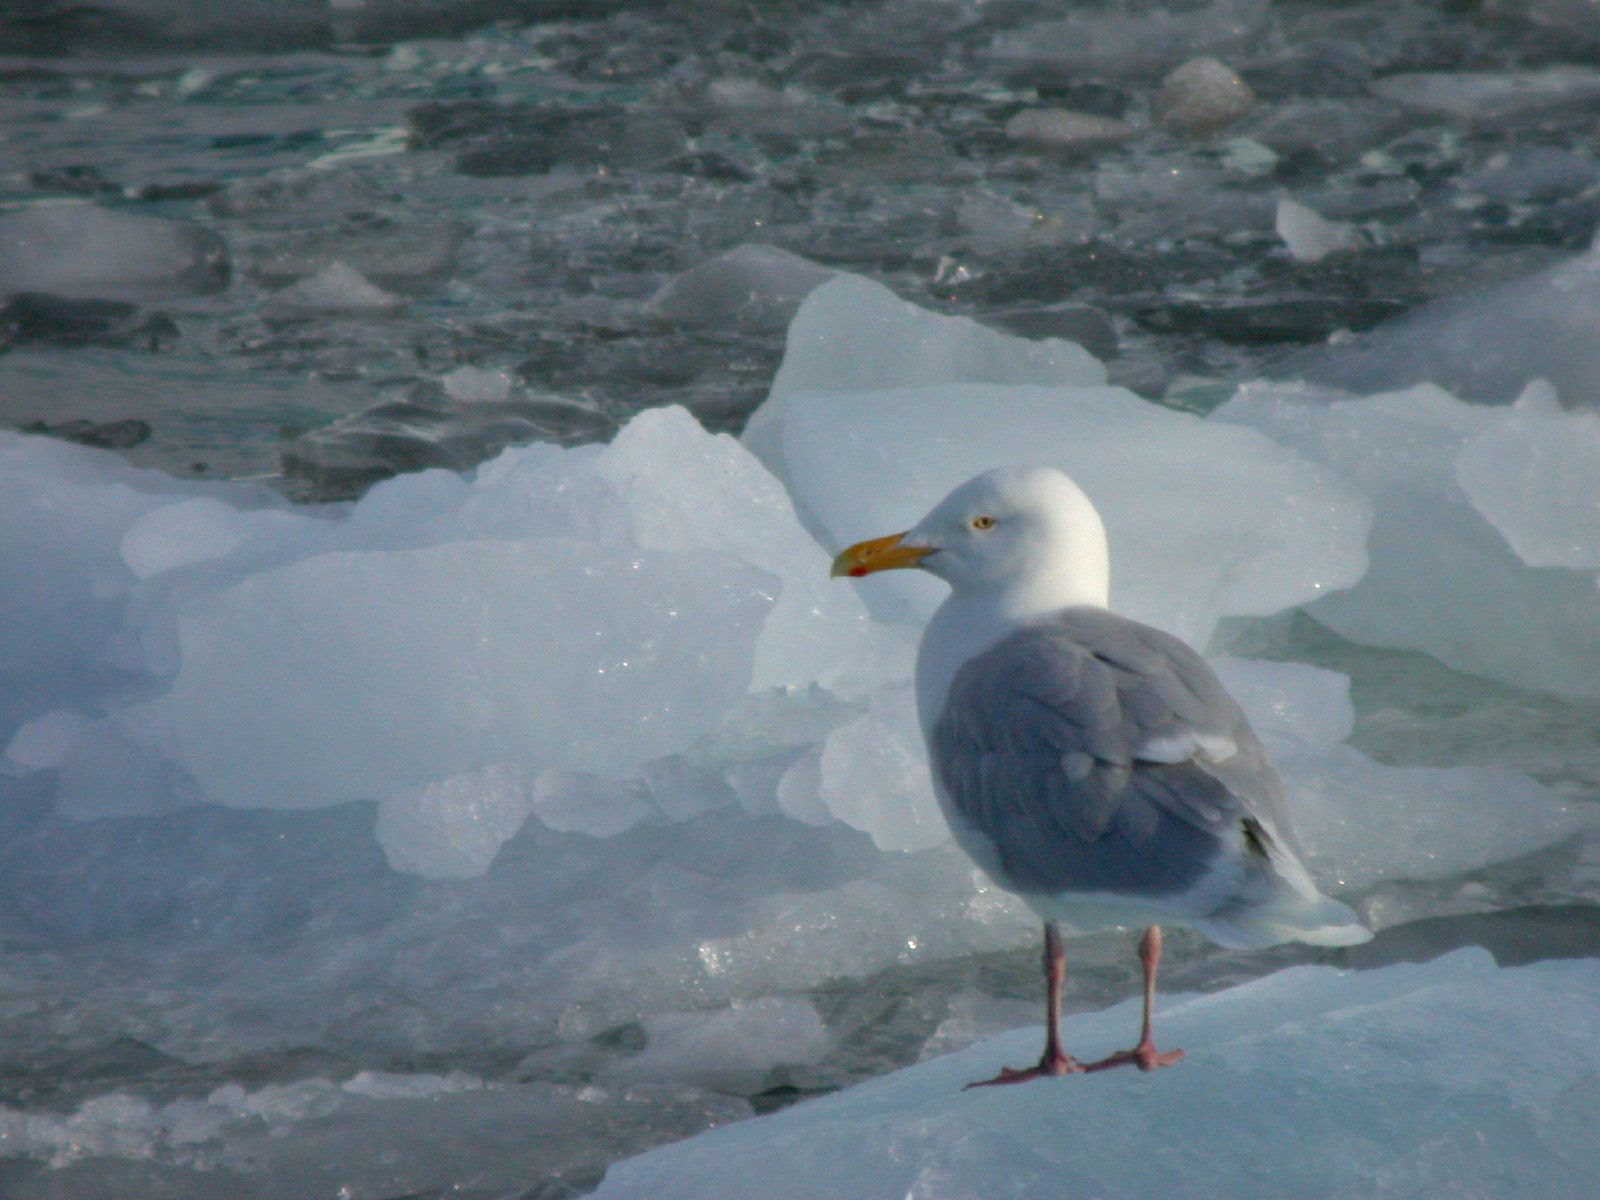 http://upload.wikimedia.org/wikipedia/commons/7/7a/Glacous_Gull_on_ice.jpg